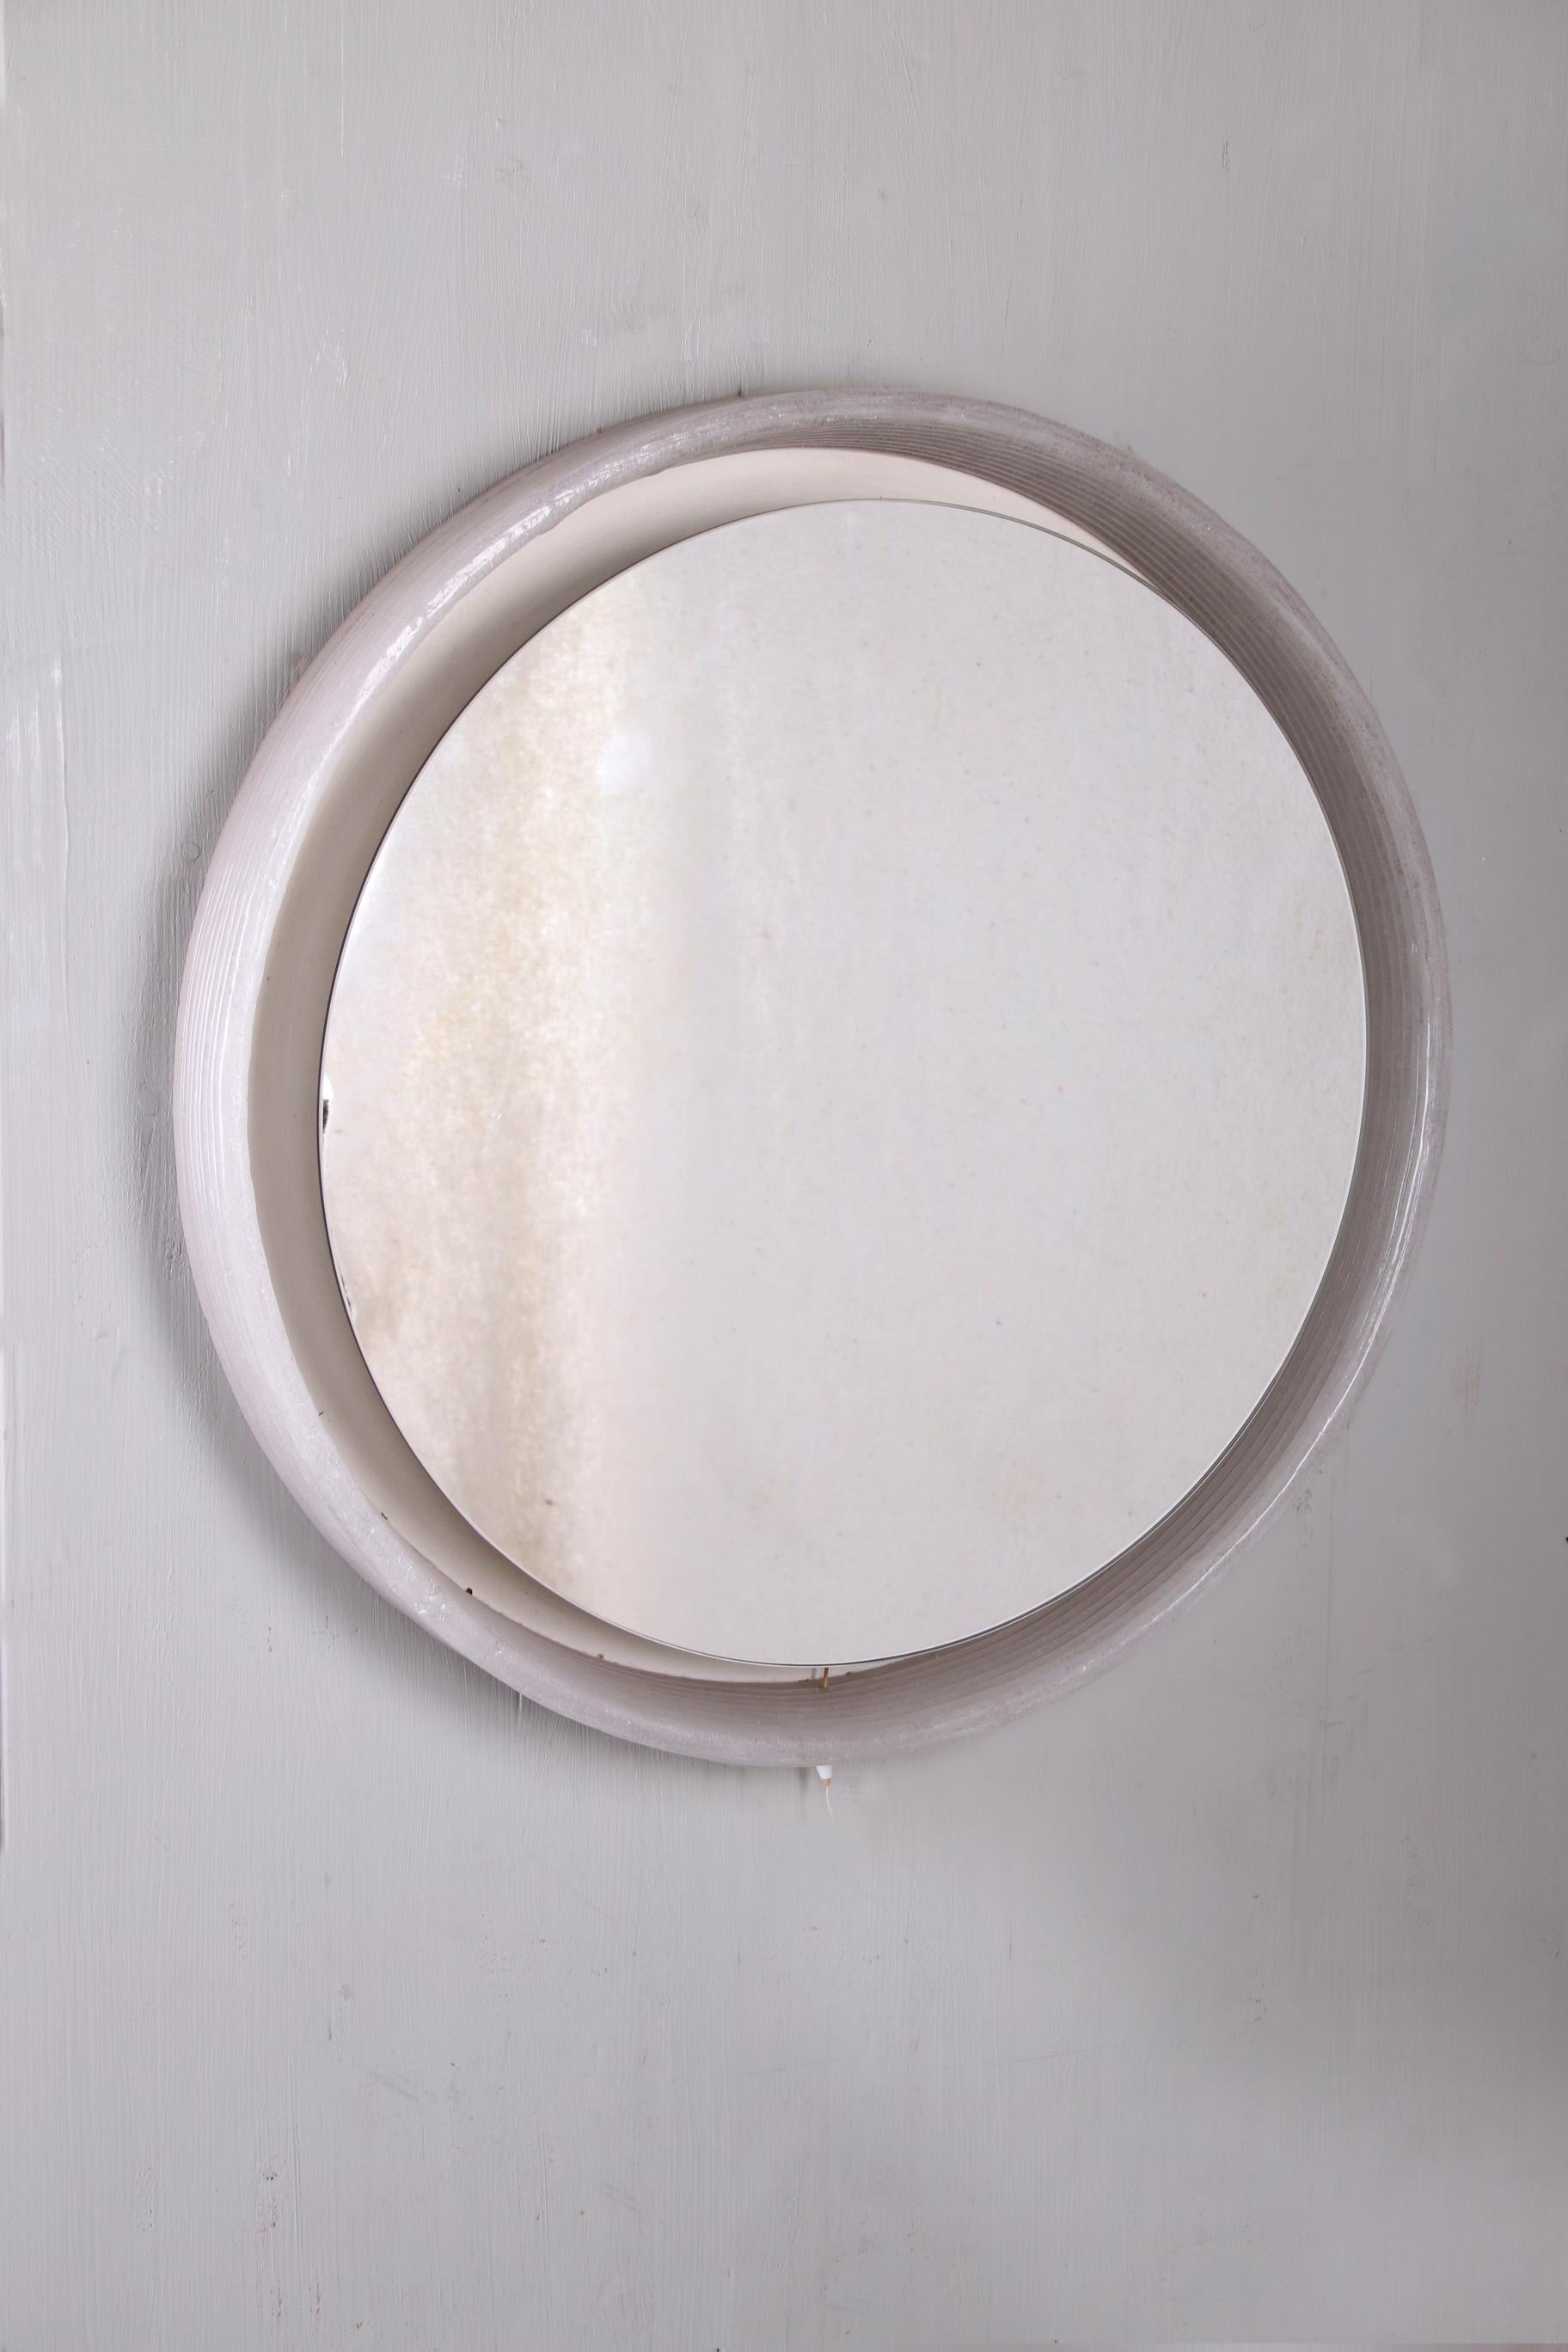 The round mirror from Hillebrand is made of metal with plexiglass and was produced in the 60s.

The mirror has interior lighting which emits a warm soft light when it is on. The mirror is in very good condition. There is a standing edge around the